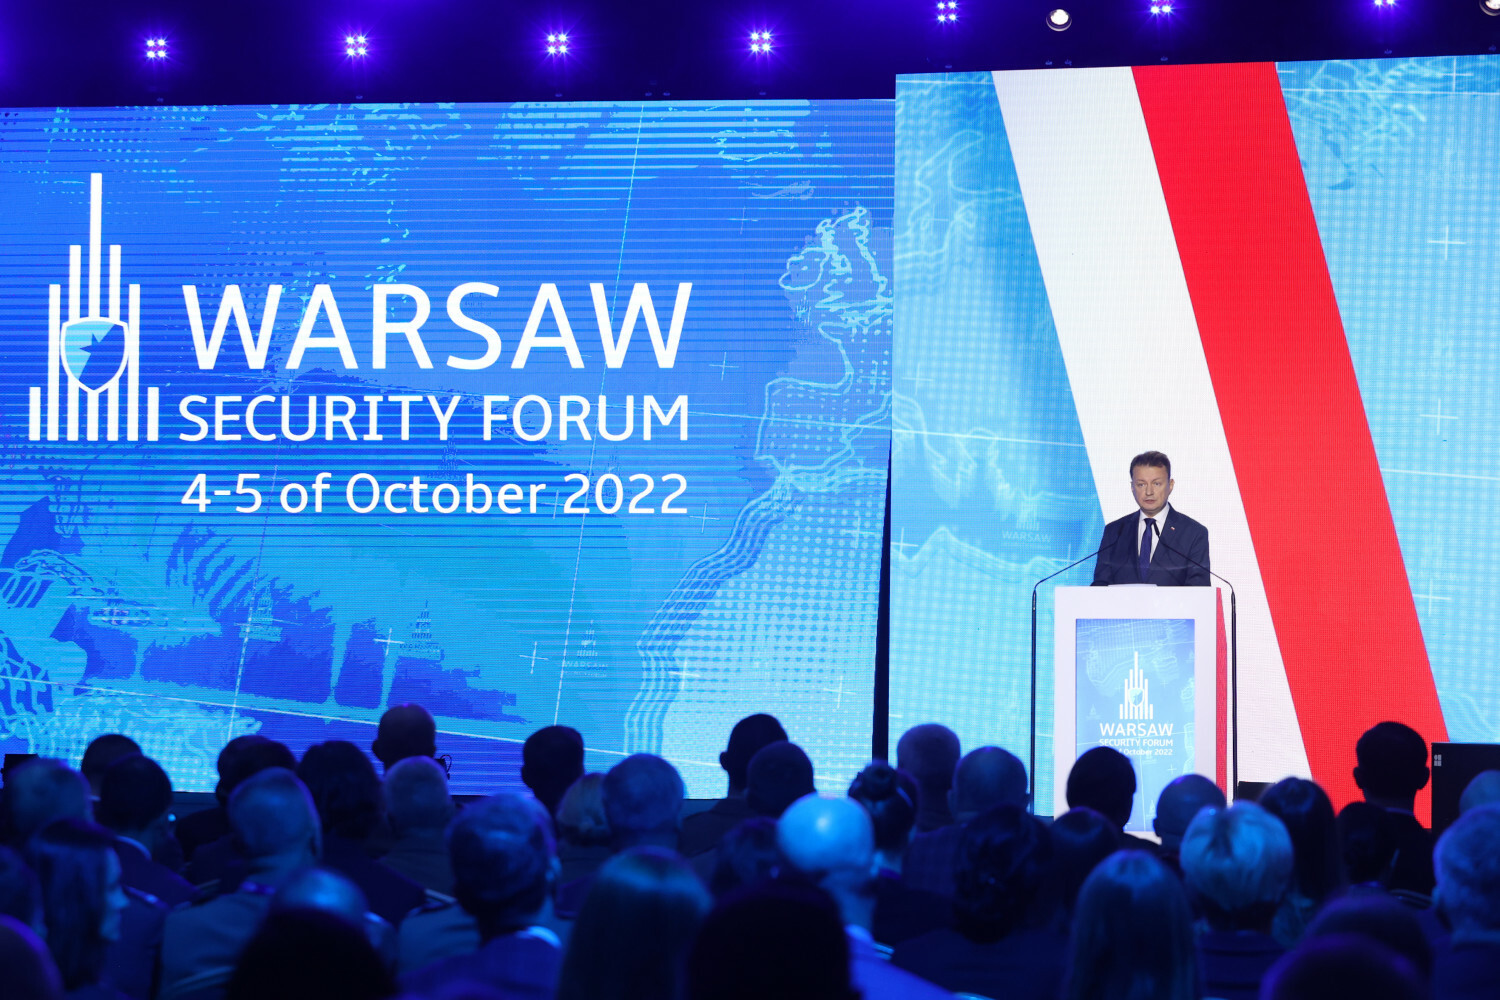 Warsaw Security Forum conference begins Dignity DignityNews.eu